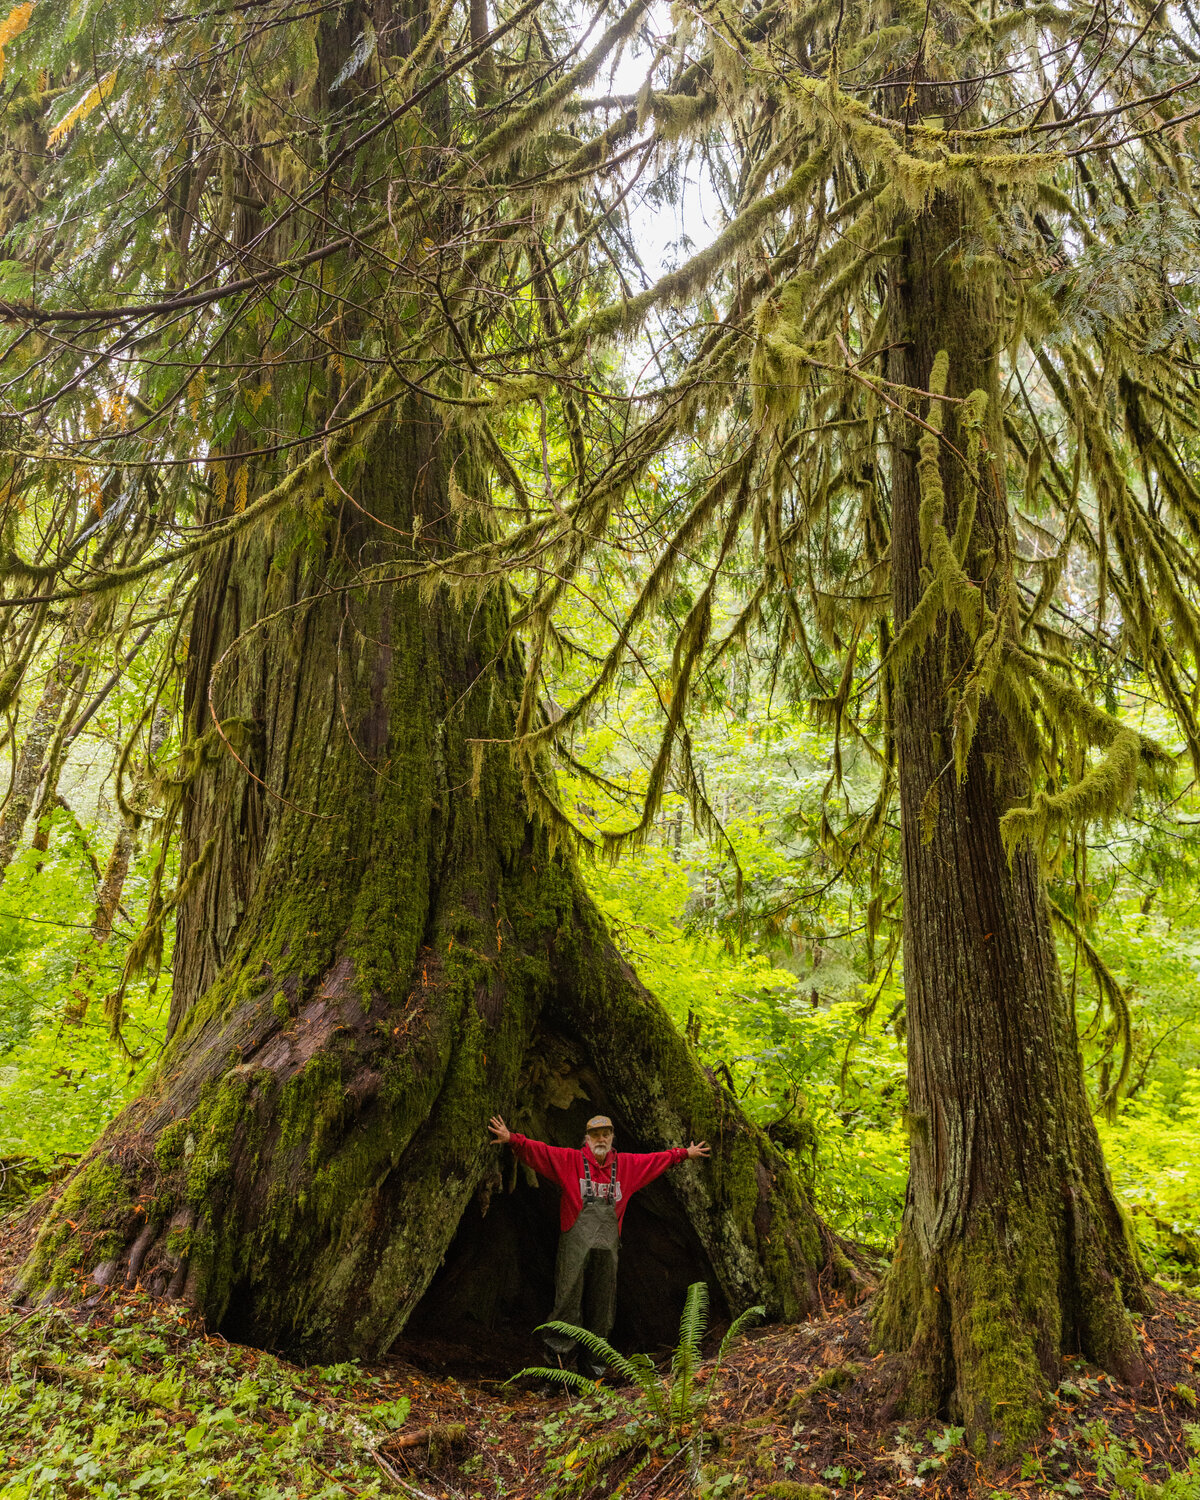 John Squires, a founding member of the Pinchot Partners, poses fro a photo next to a tree in the Grove of the Matriarchs on Thursday, Sept. 28, in the Gifford Pinchot National Forest.